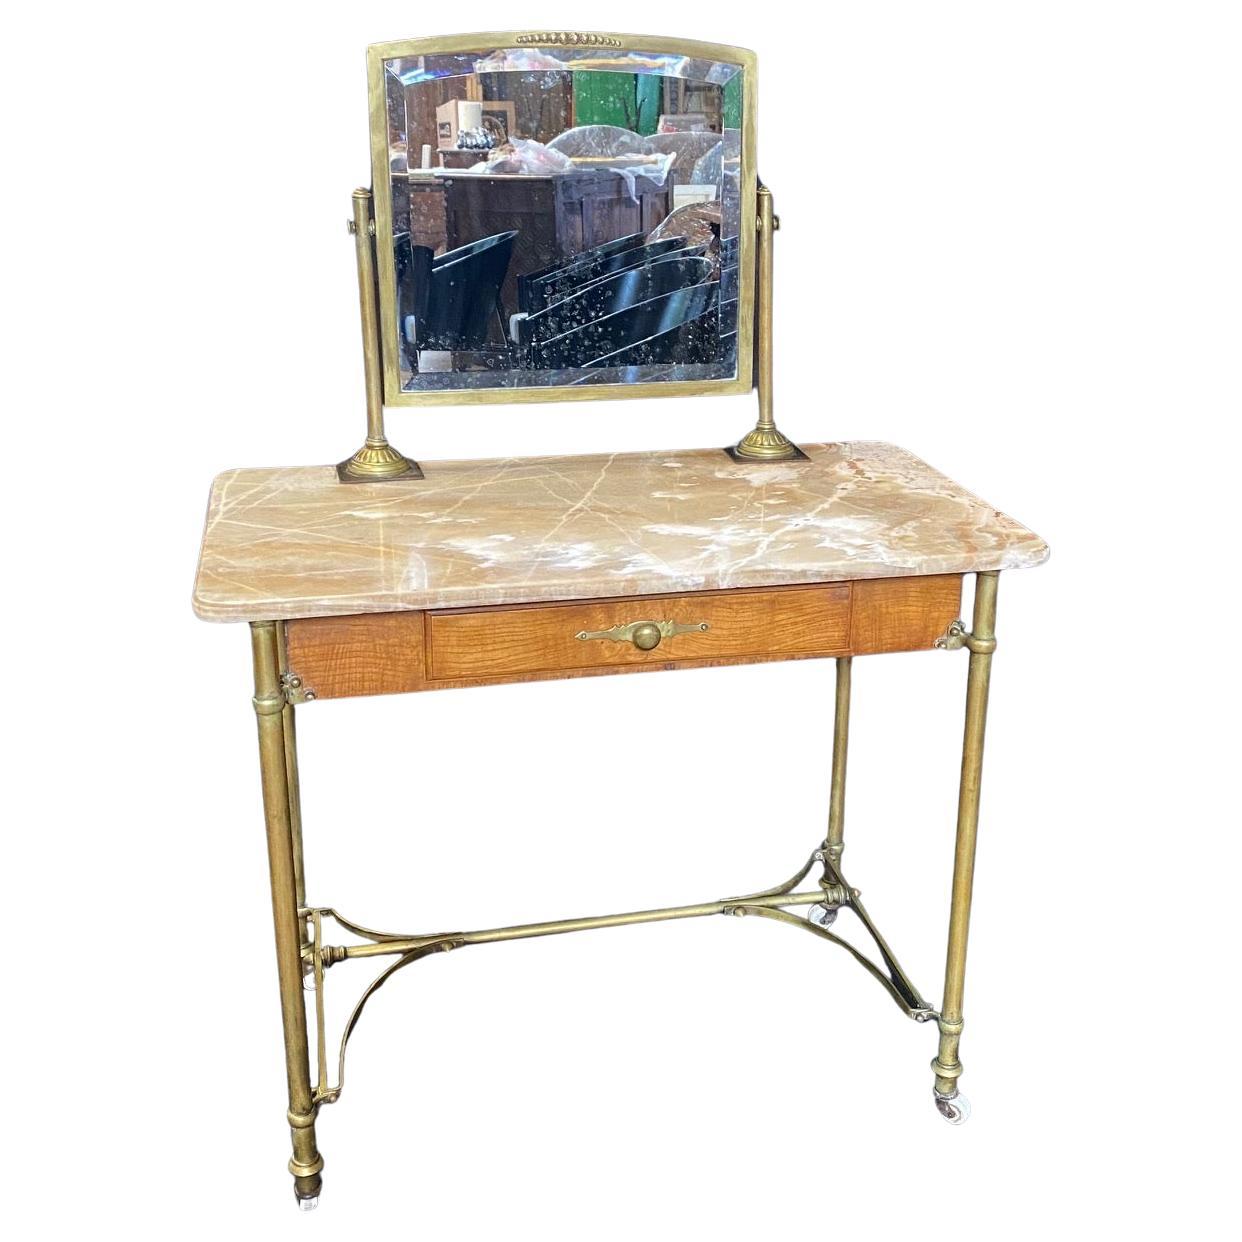 French Art Nouveau Marble Top Dressing Table with Beveled Mirror and Brass Legs